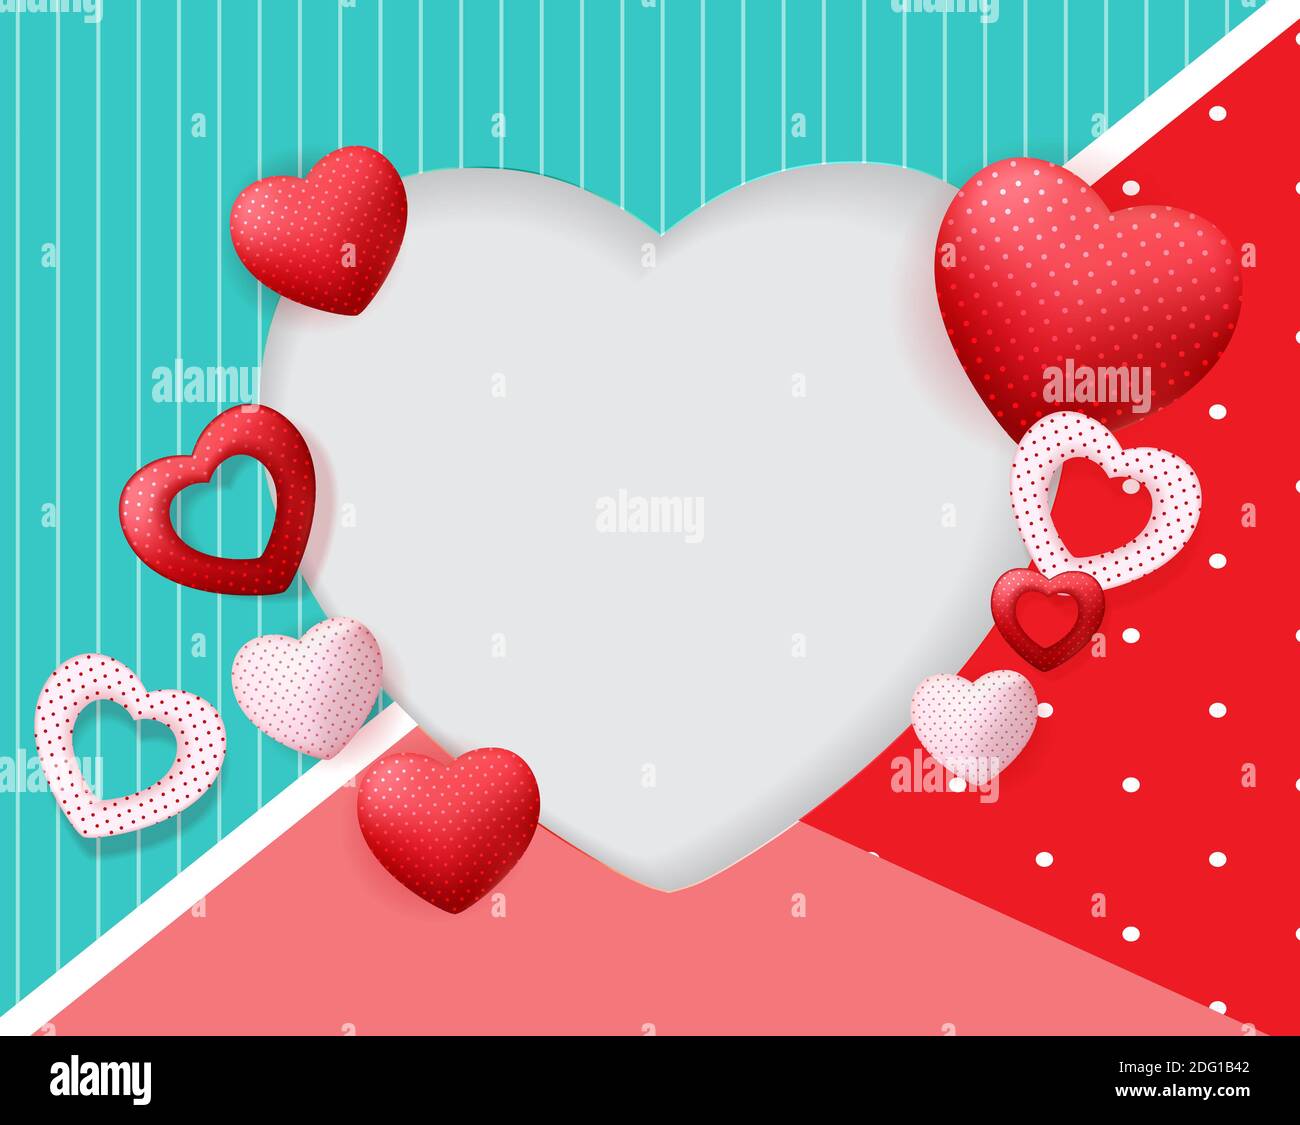 Happy Valentines Day Card with Heart. Illustration Stock Photo